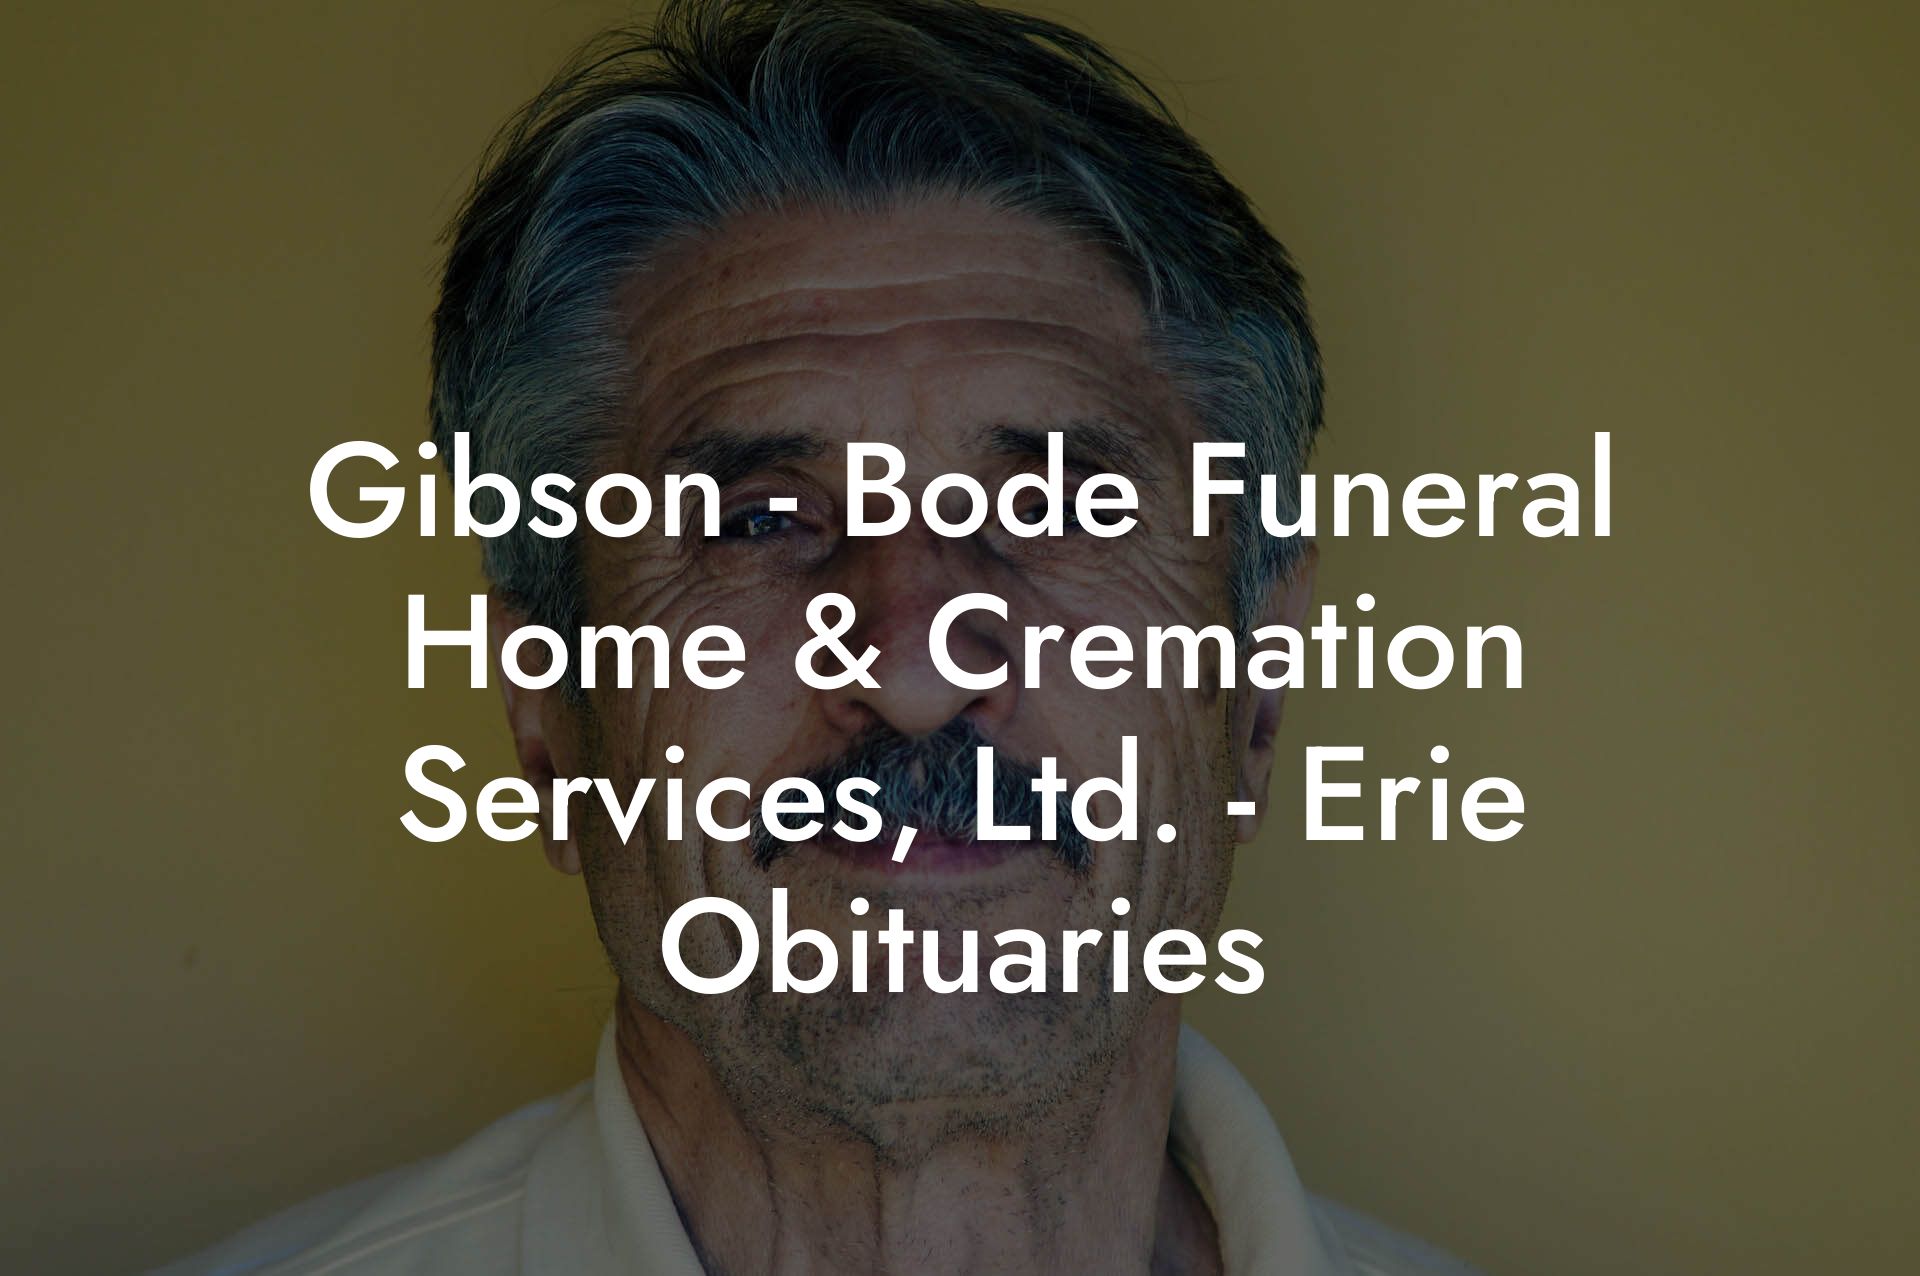 Gibson - Bode Funeral Home & Cremation Services, Ltd. - Erie Obituaries